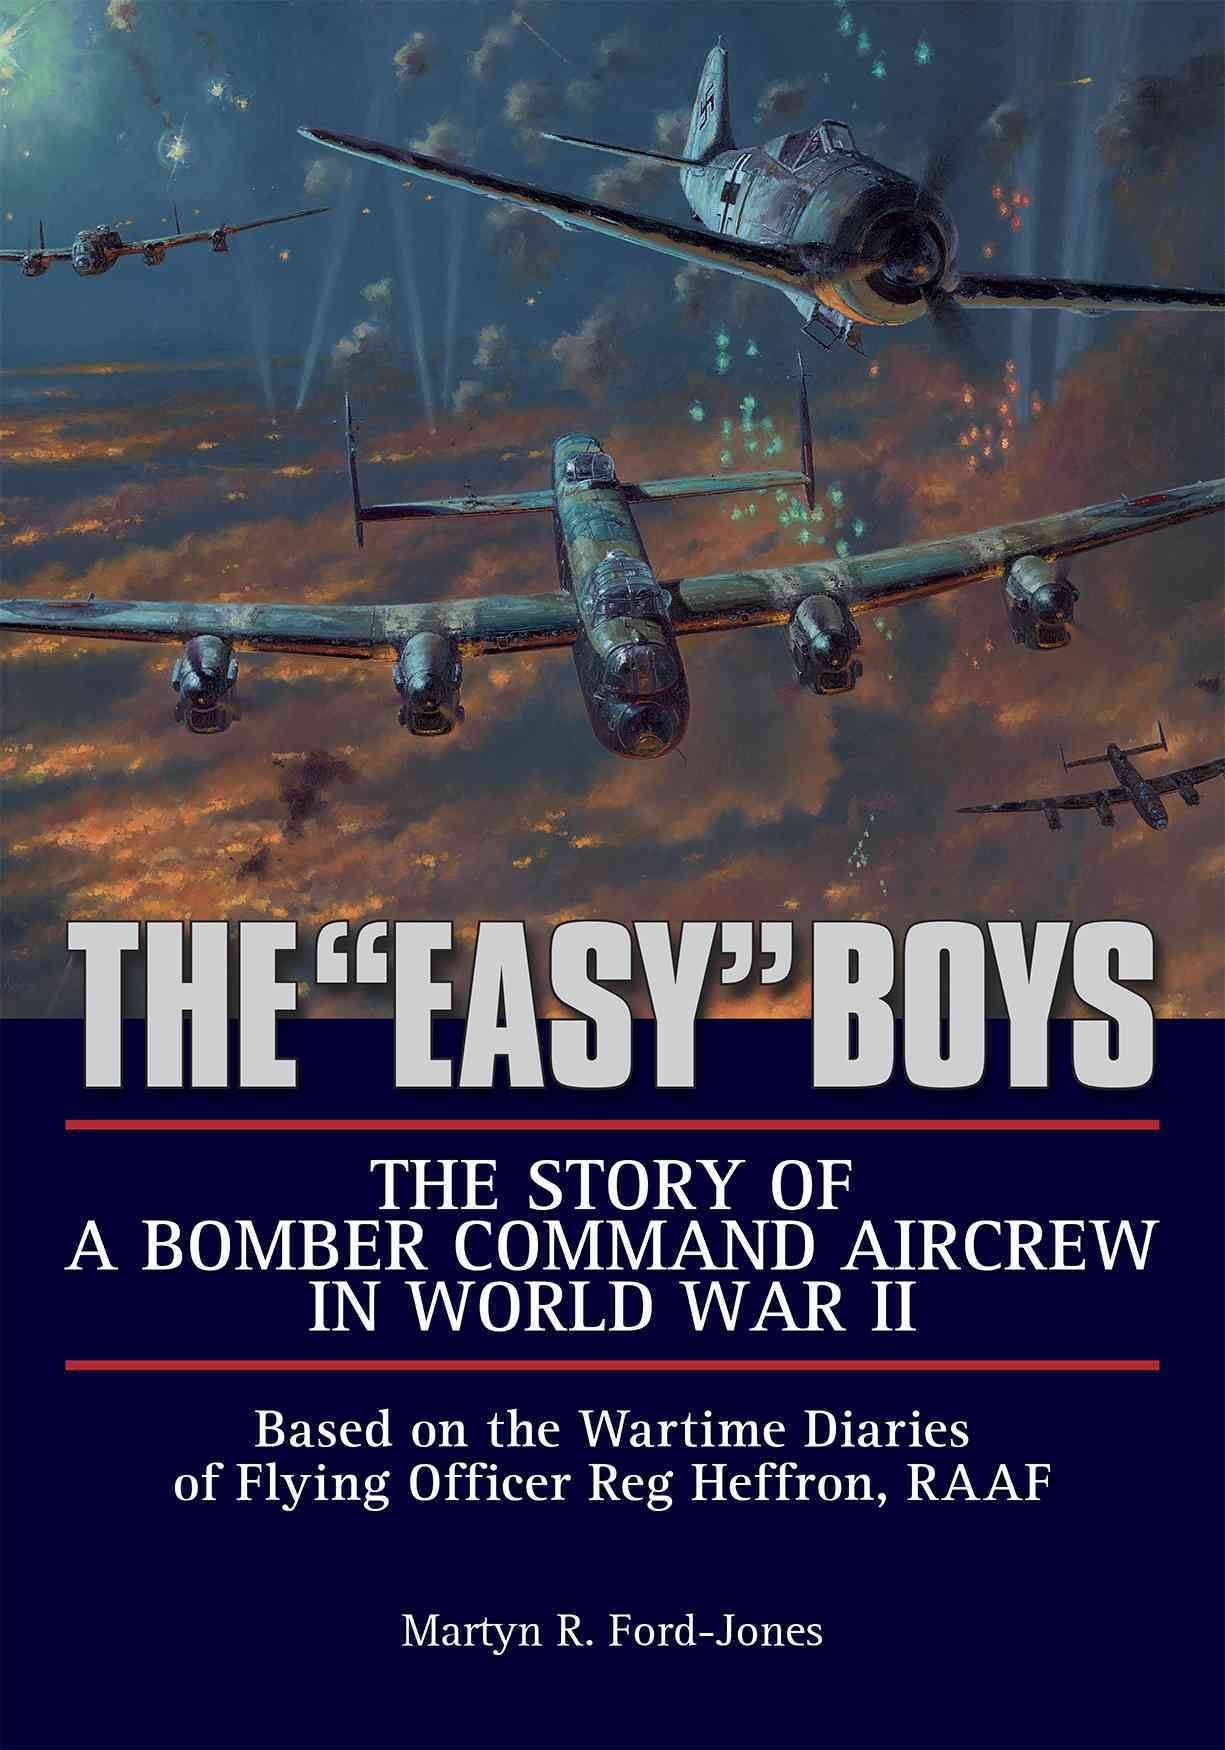 Easy Boys: Story of a Bomber Command Aircrew in World War II